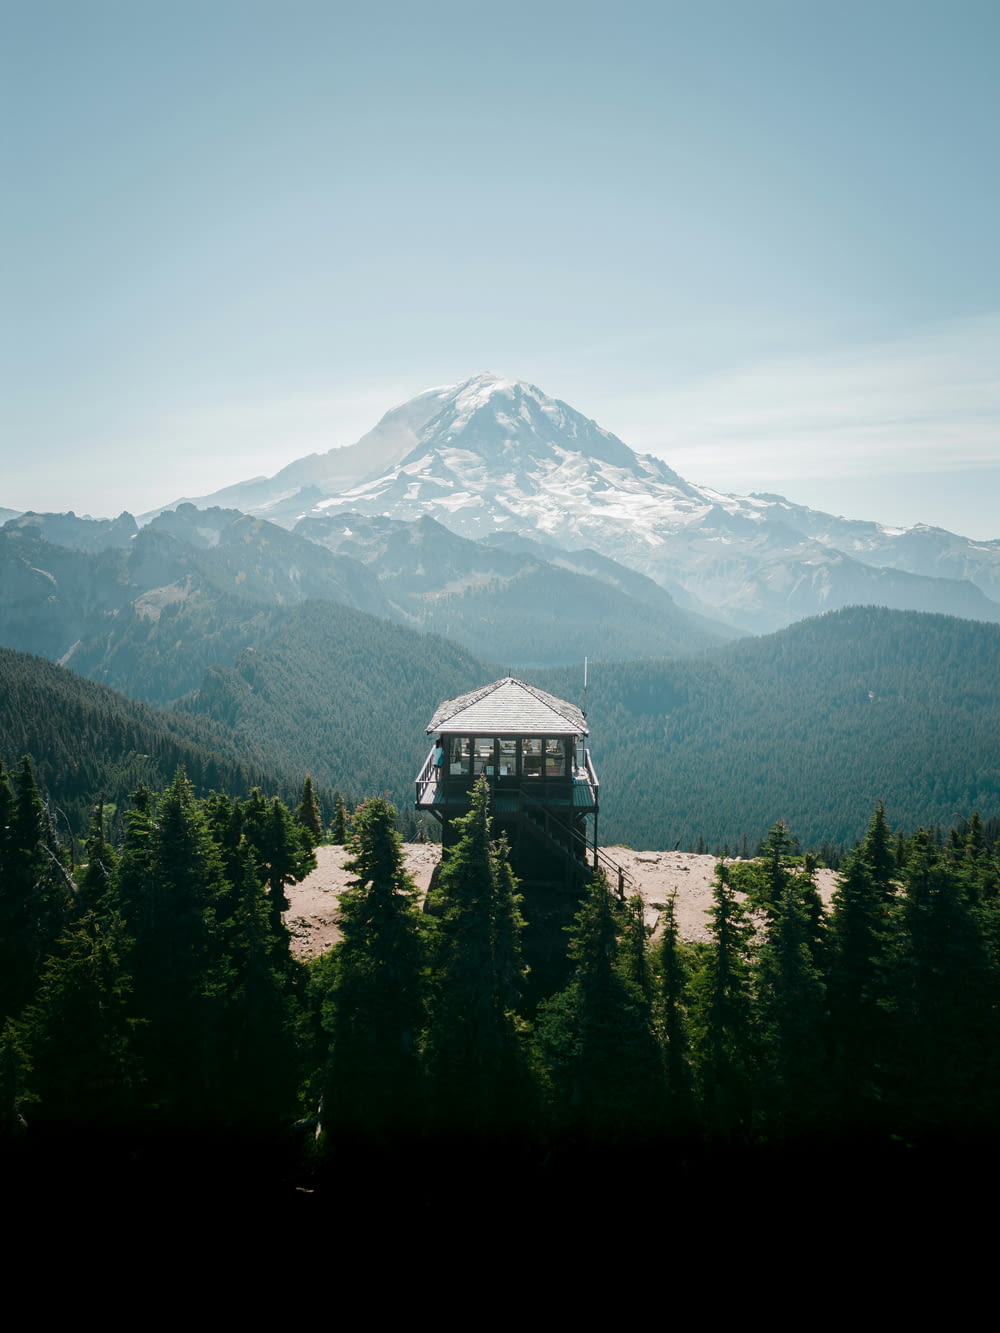 a gazebo on top of a hill with a mountain in the background